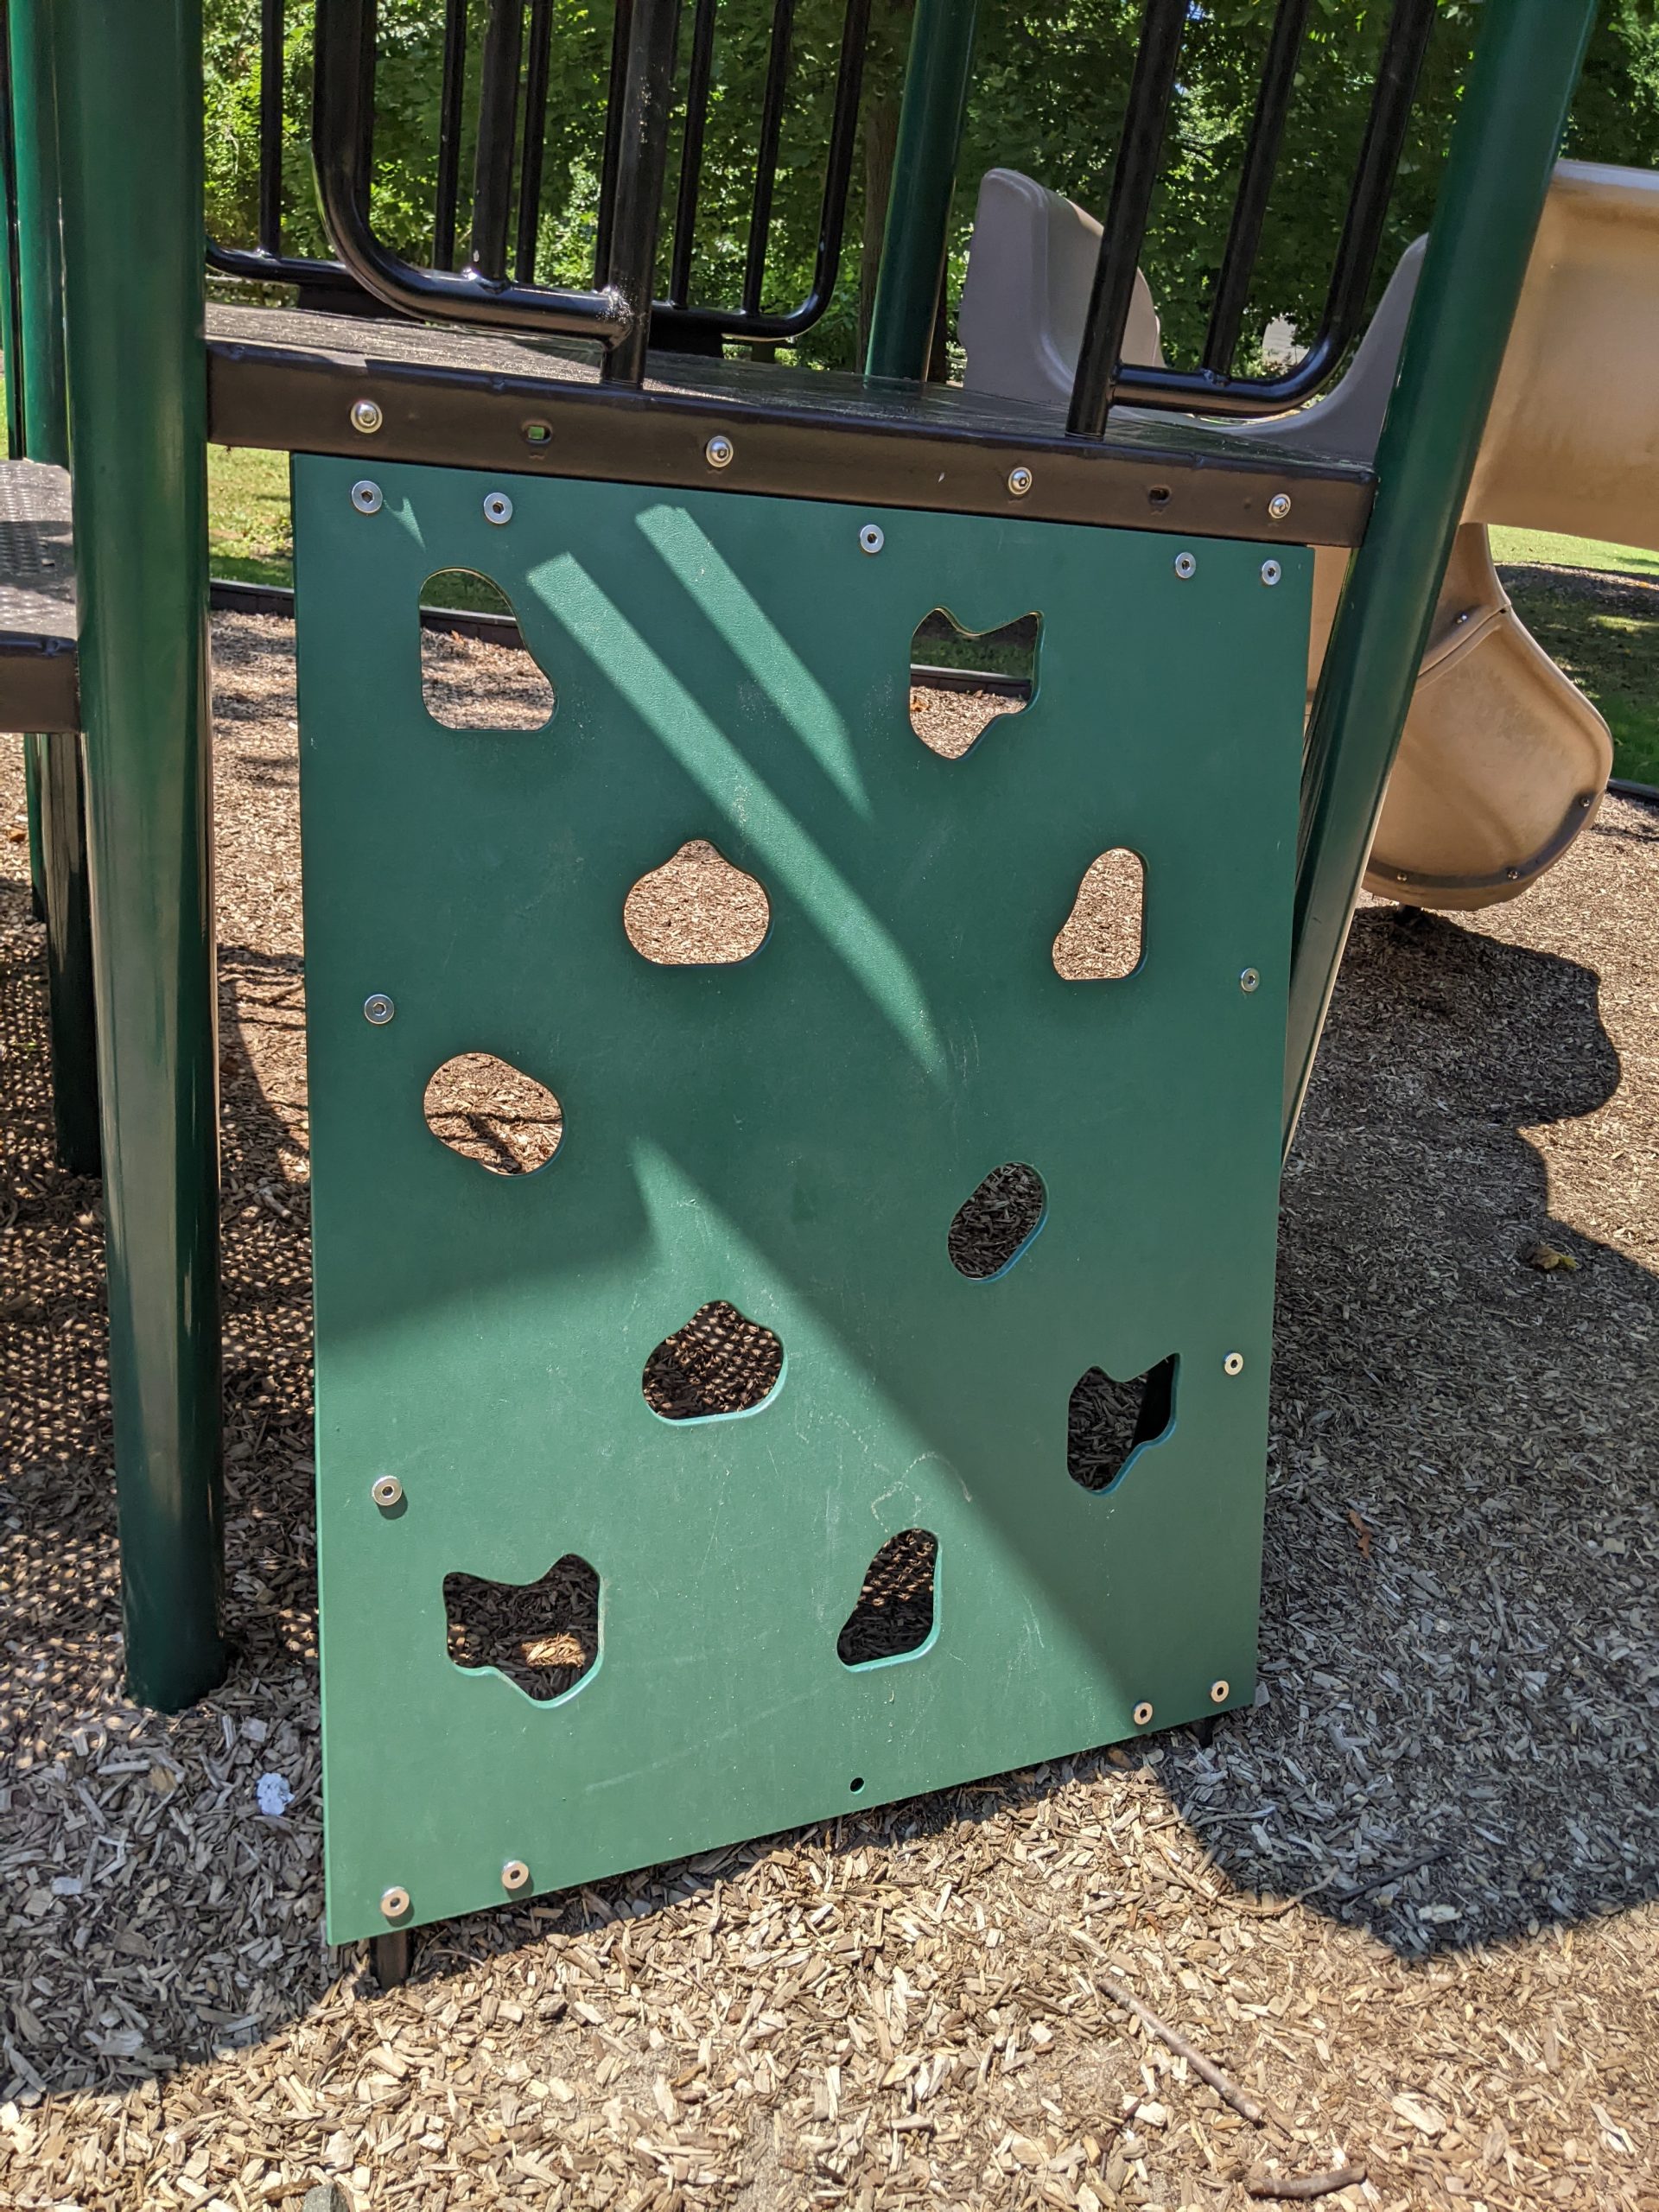 Marquand Park Playground in Princeton NJ FEATURES - Climbing wall